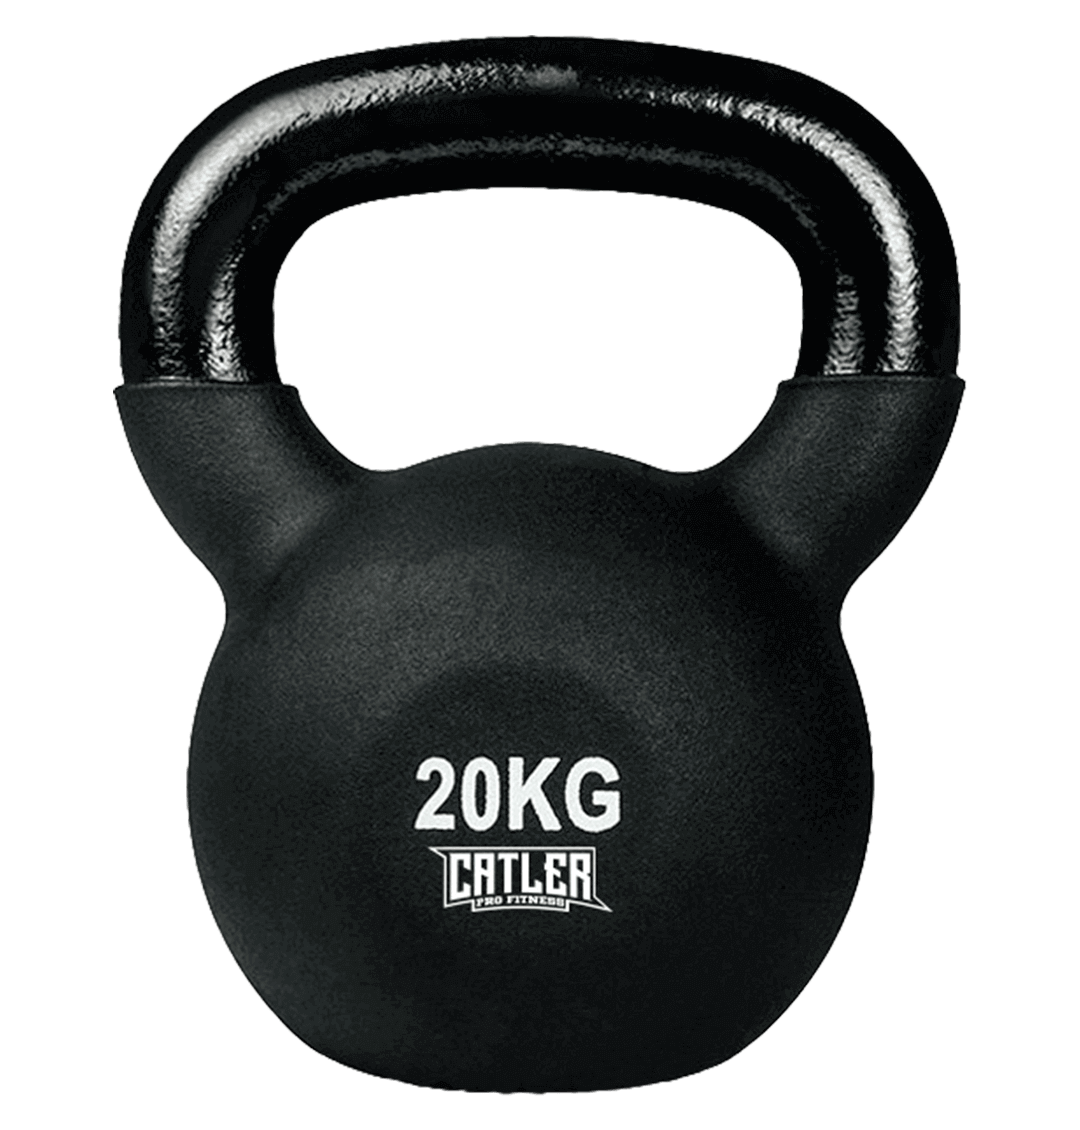 STEEL COMPETITION KETTLEBELL - Catler Pro Fitness - Accessories - United  States